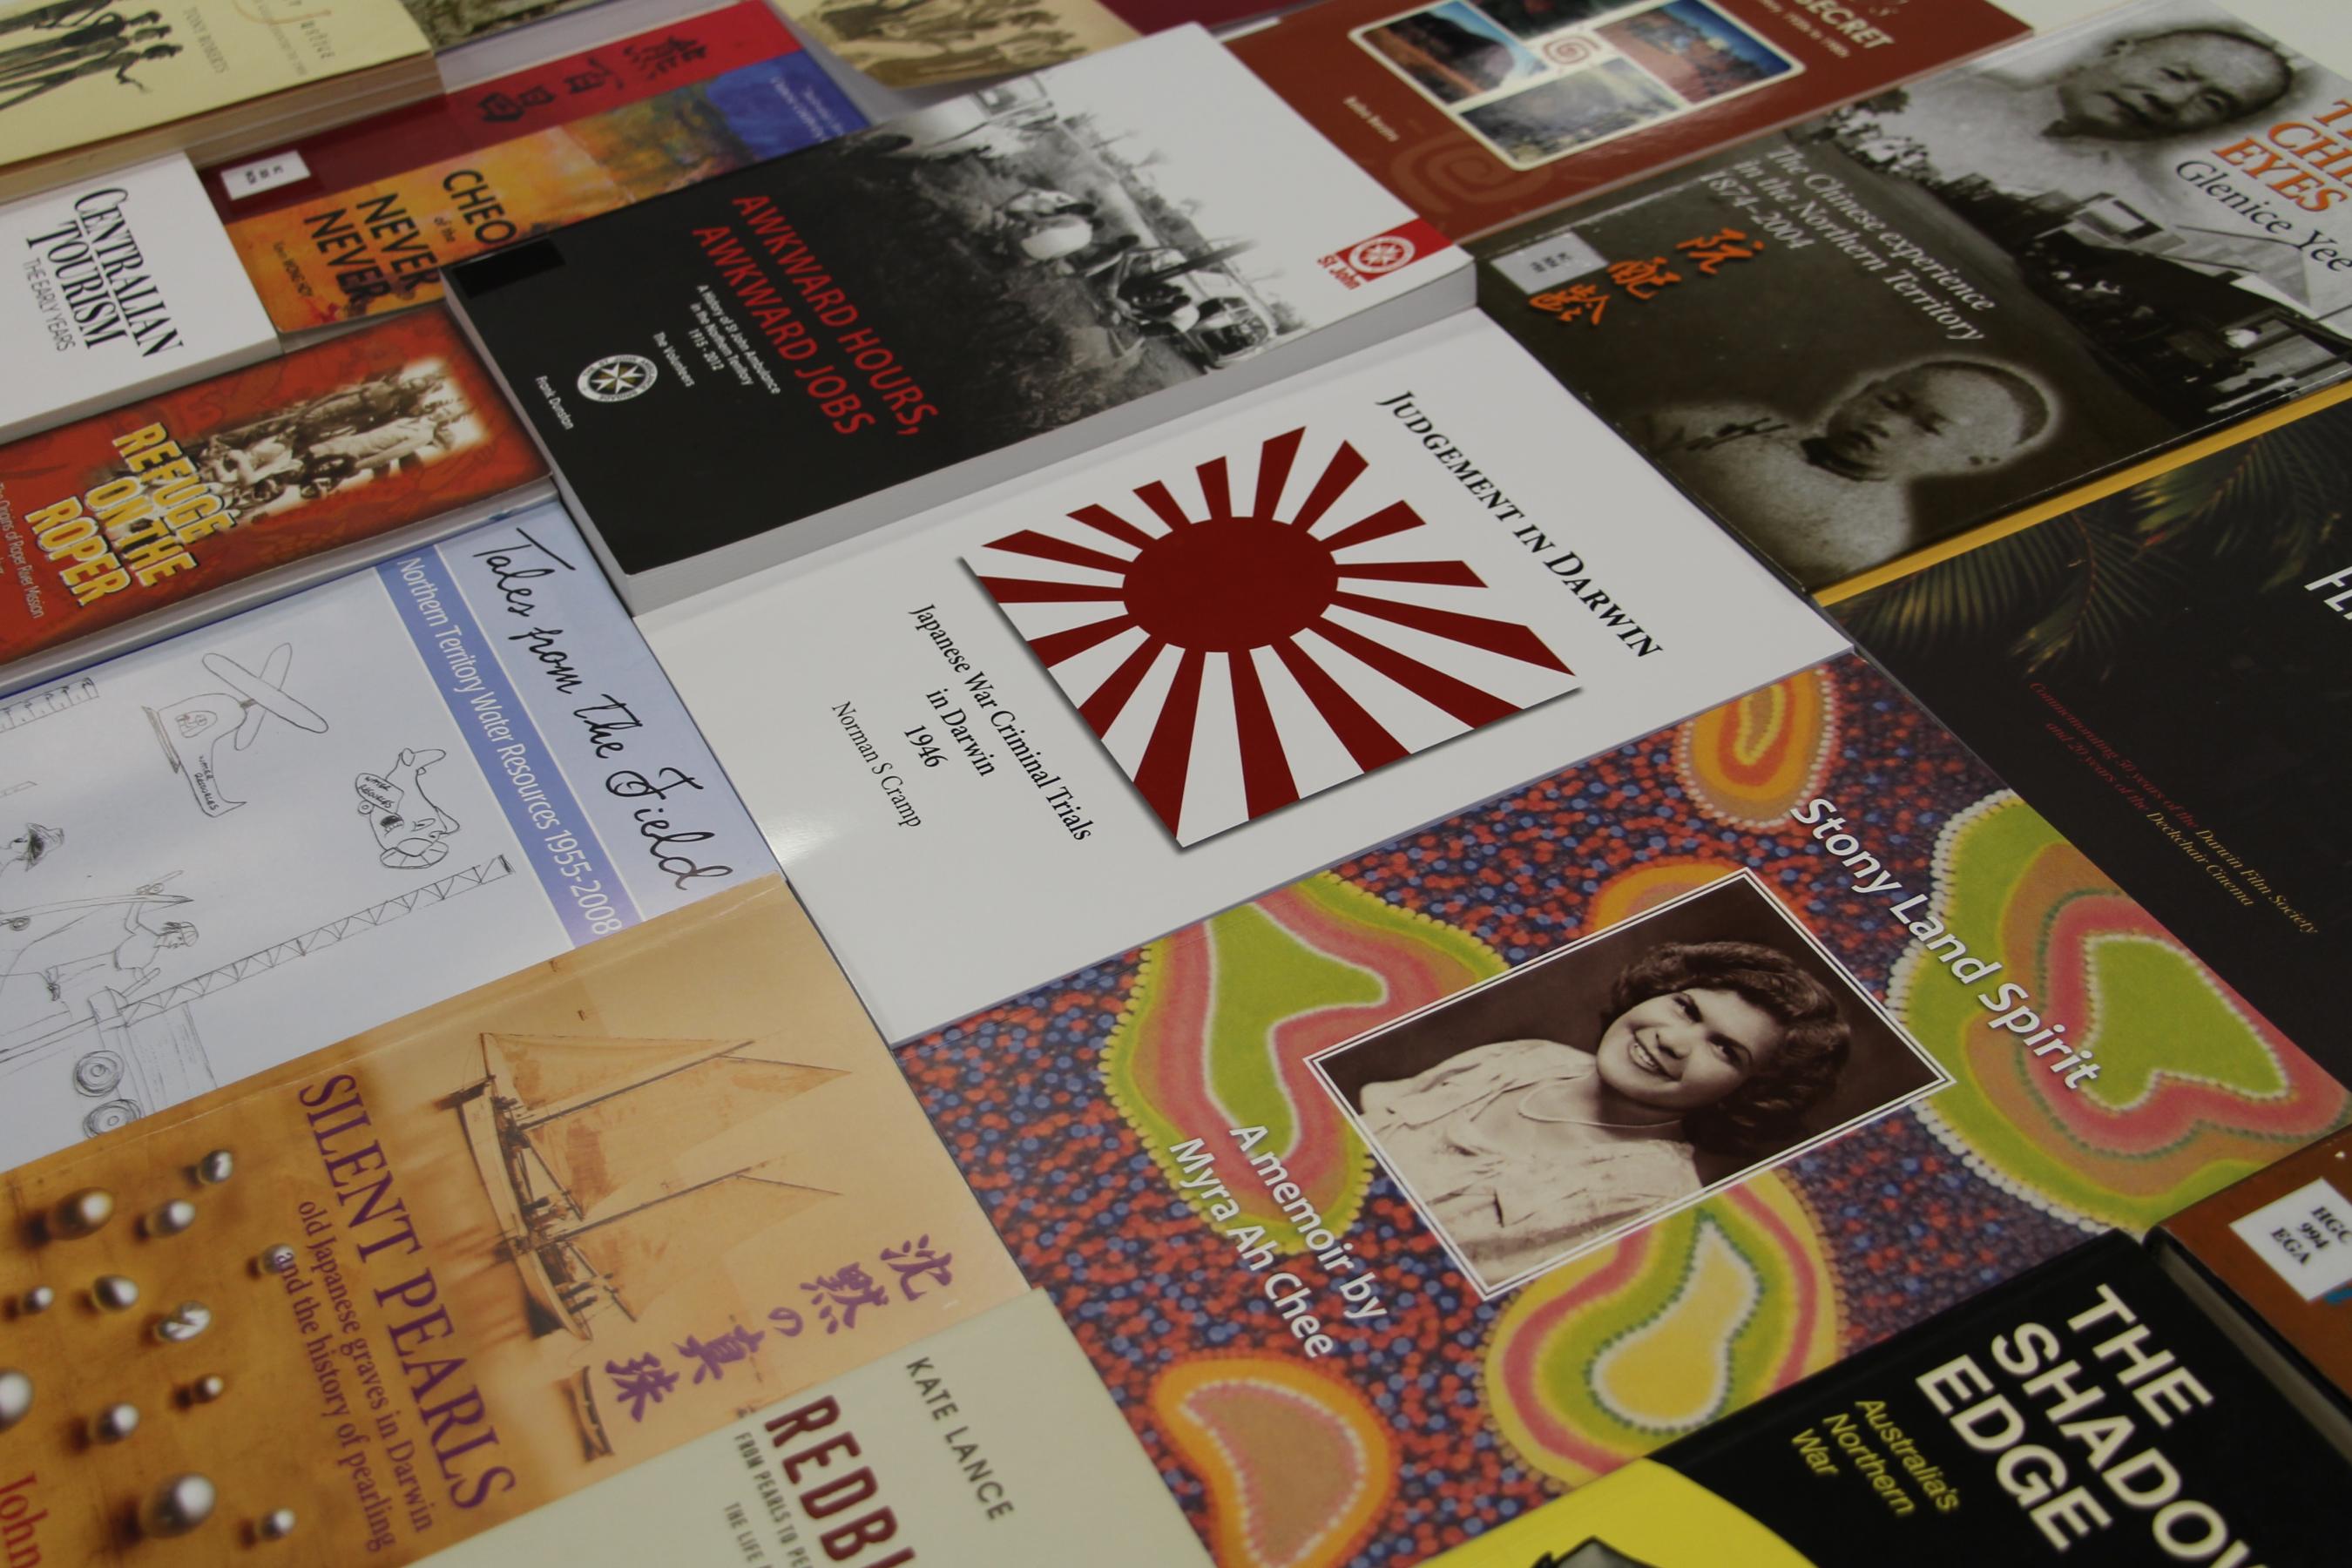 Three rows of history books laid out in a collage. Different book topics represented